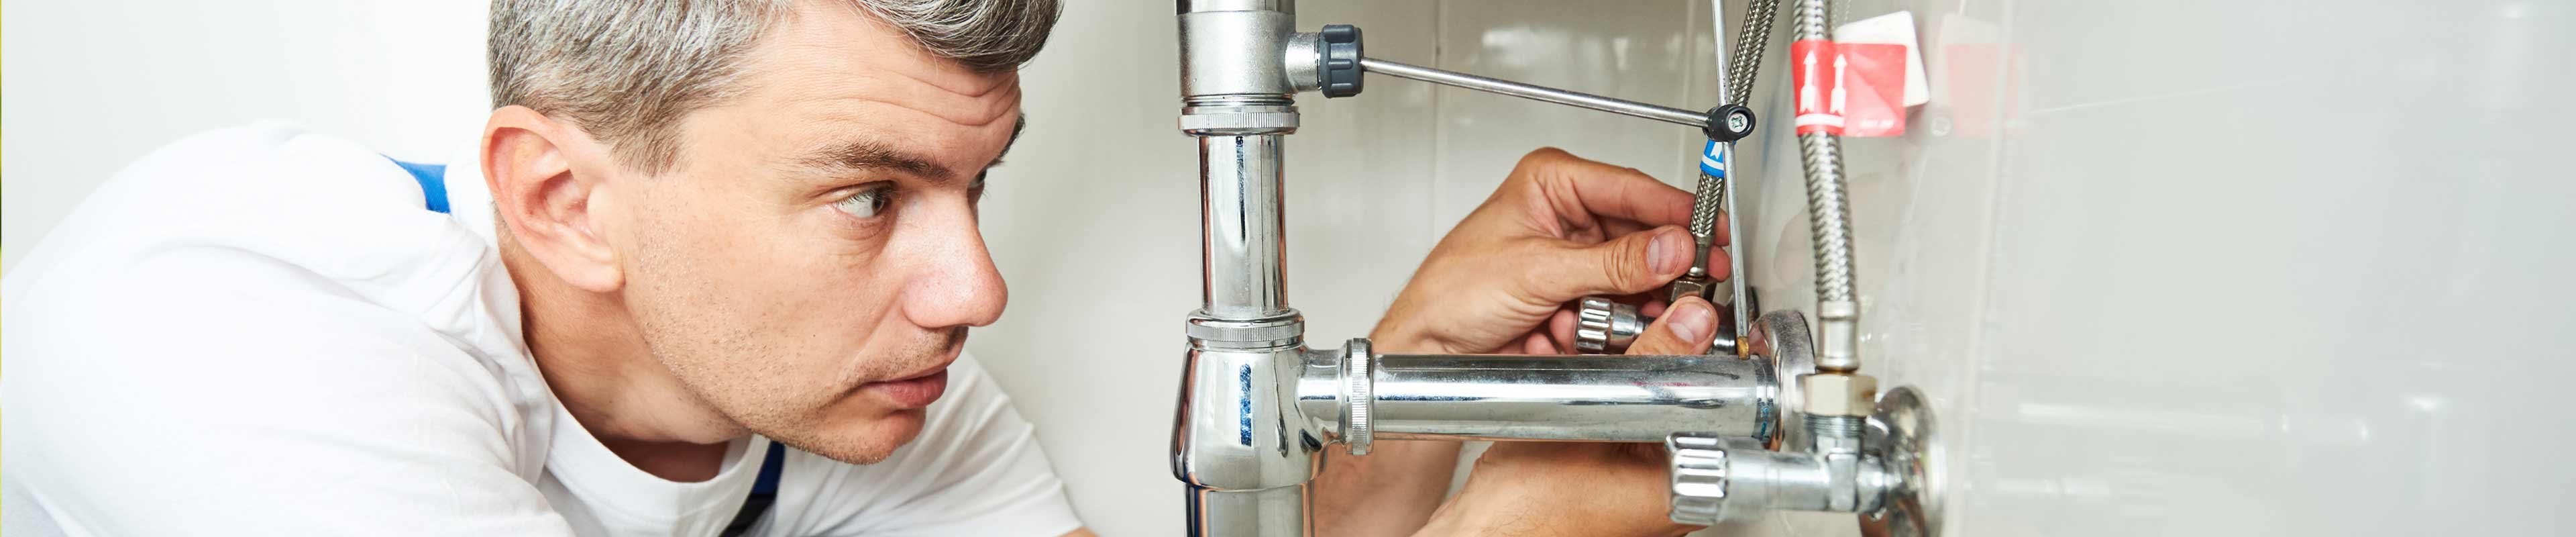 Image of a homeowner making repairs to plumbing under the sink.